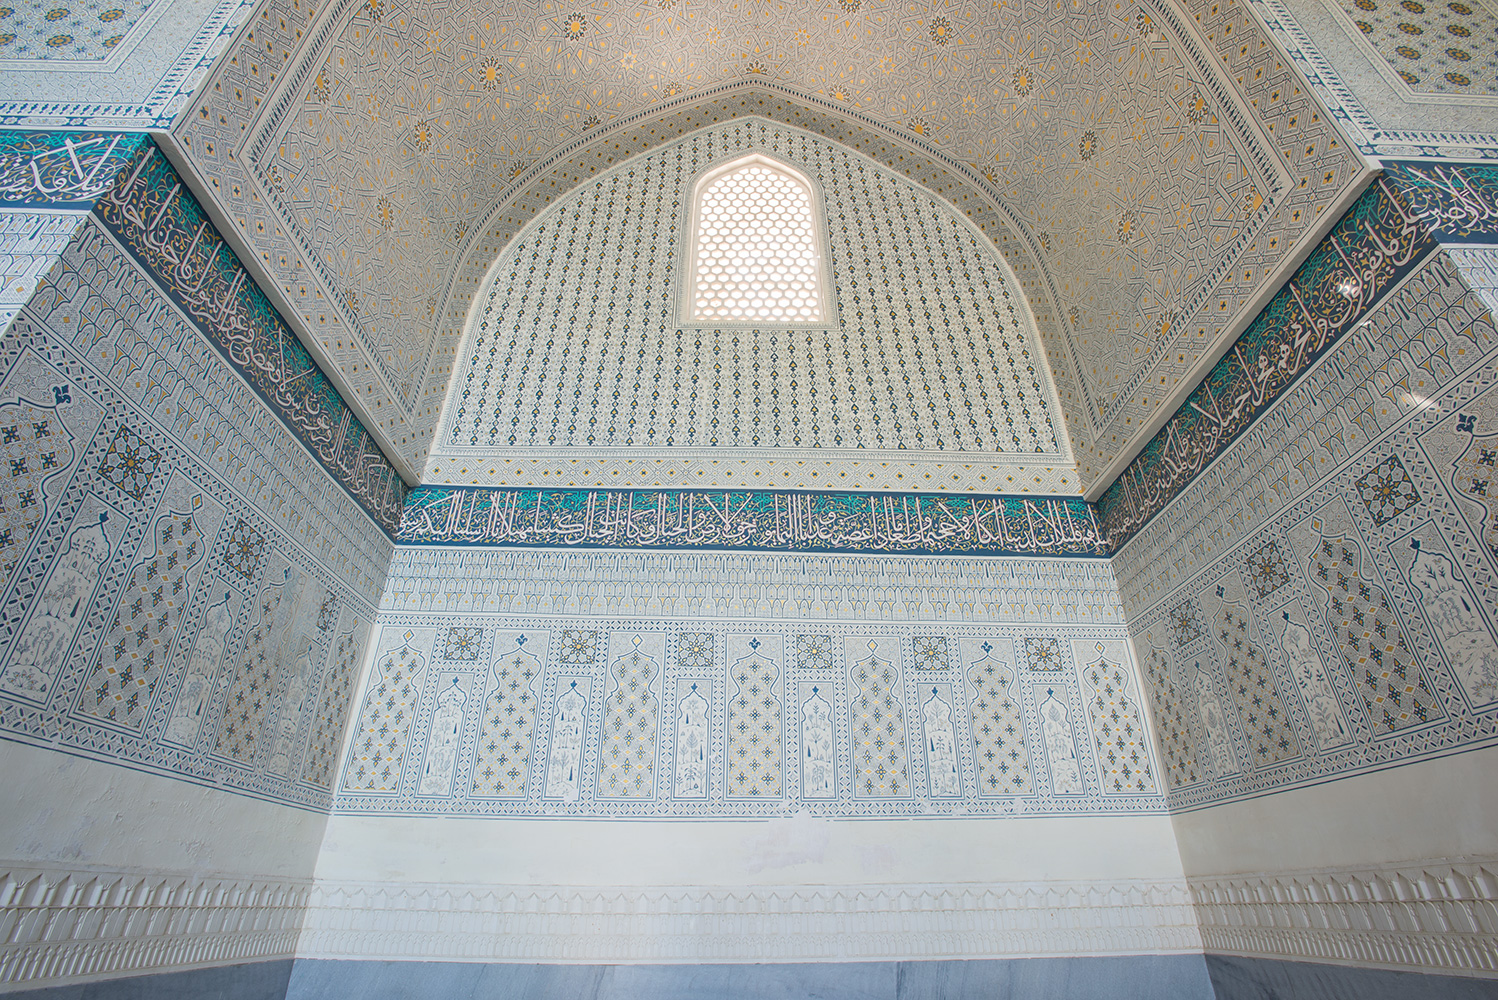 Recently completed restoration work in one of the smaller side mosques in the complex